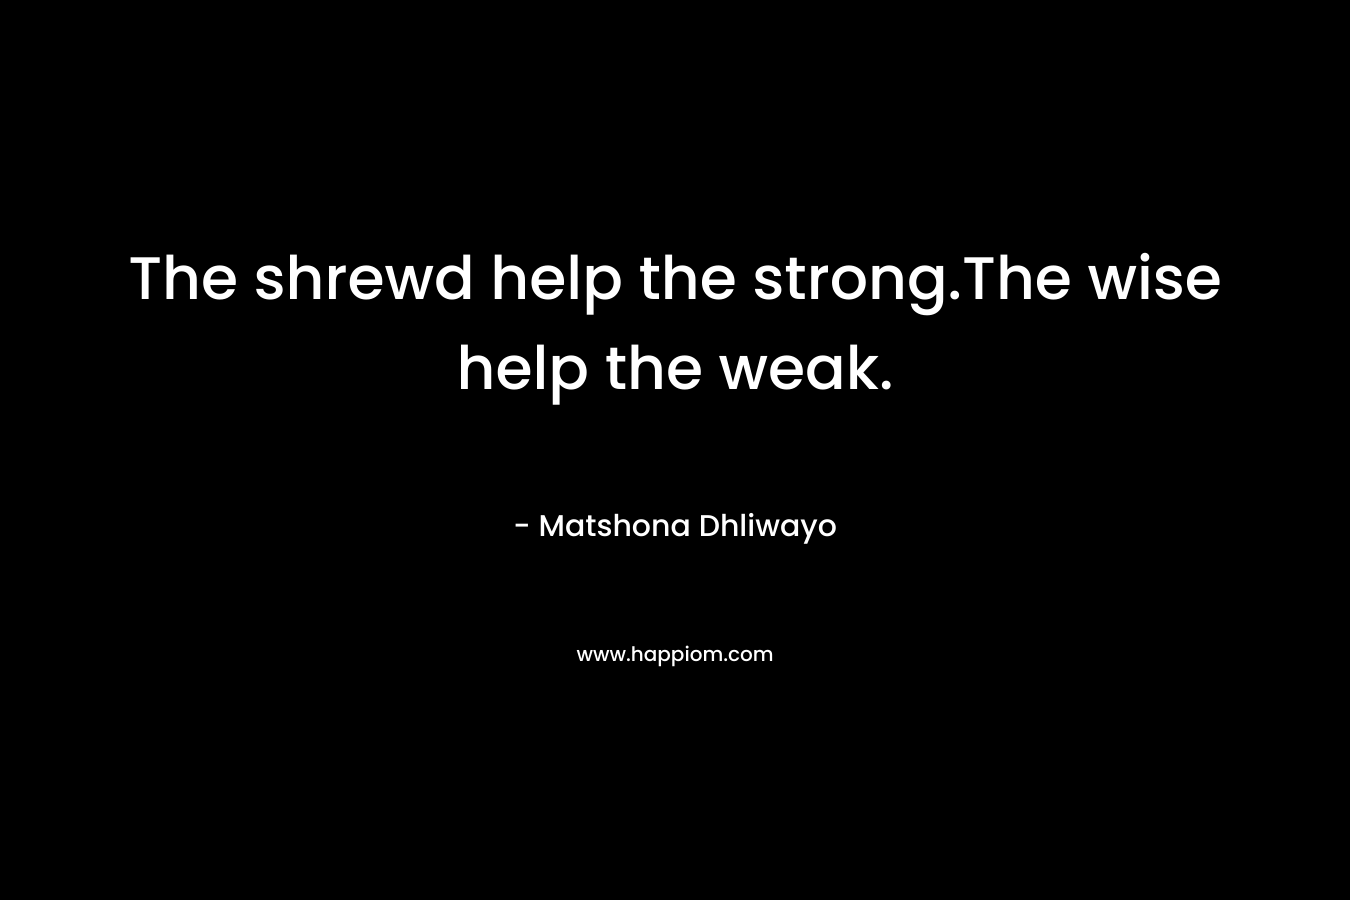 The shrewd help the strong.The wise help the weak.